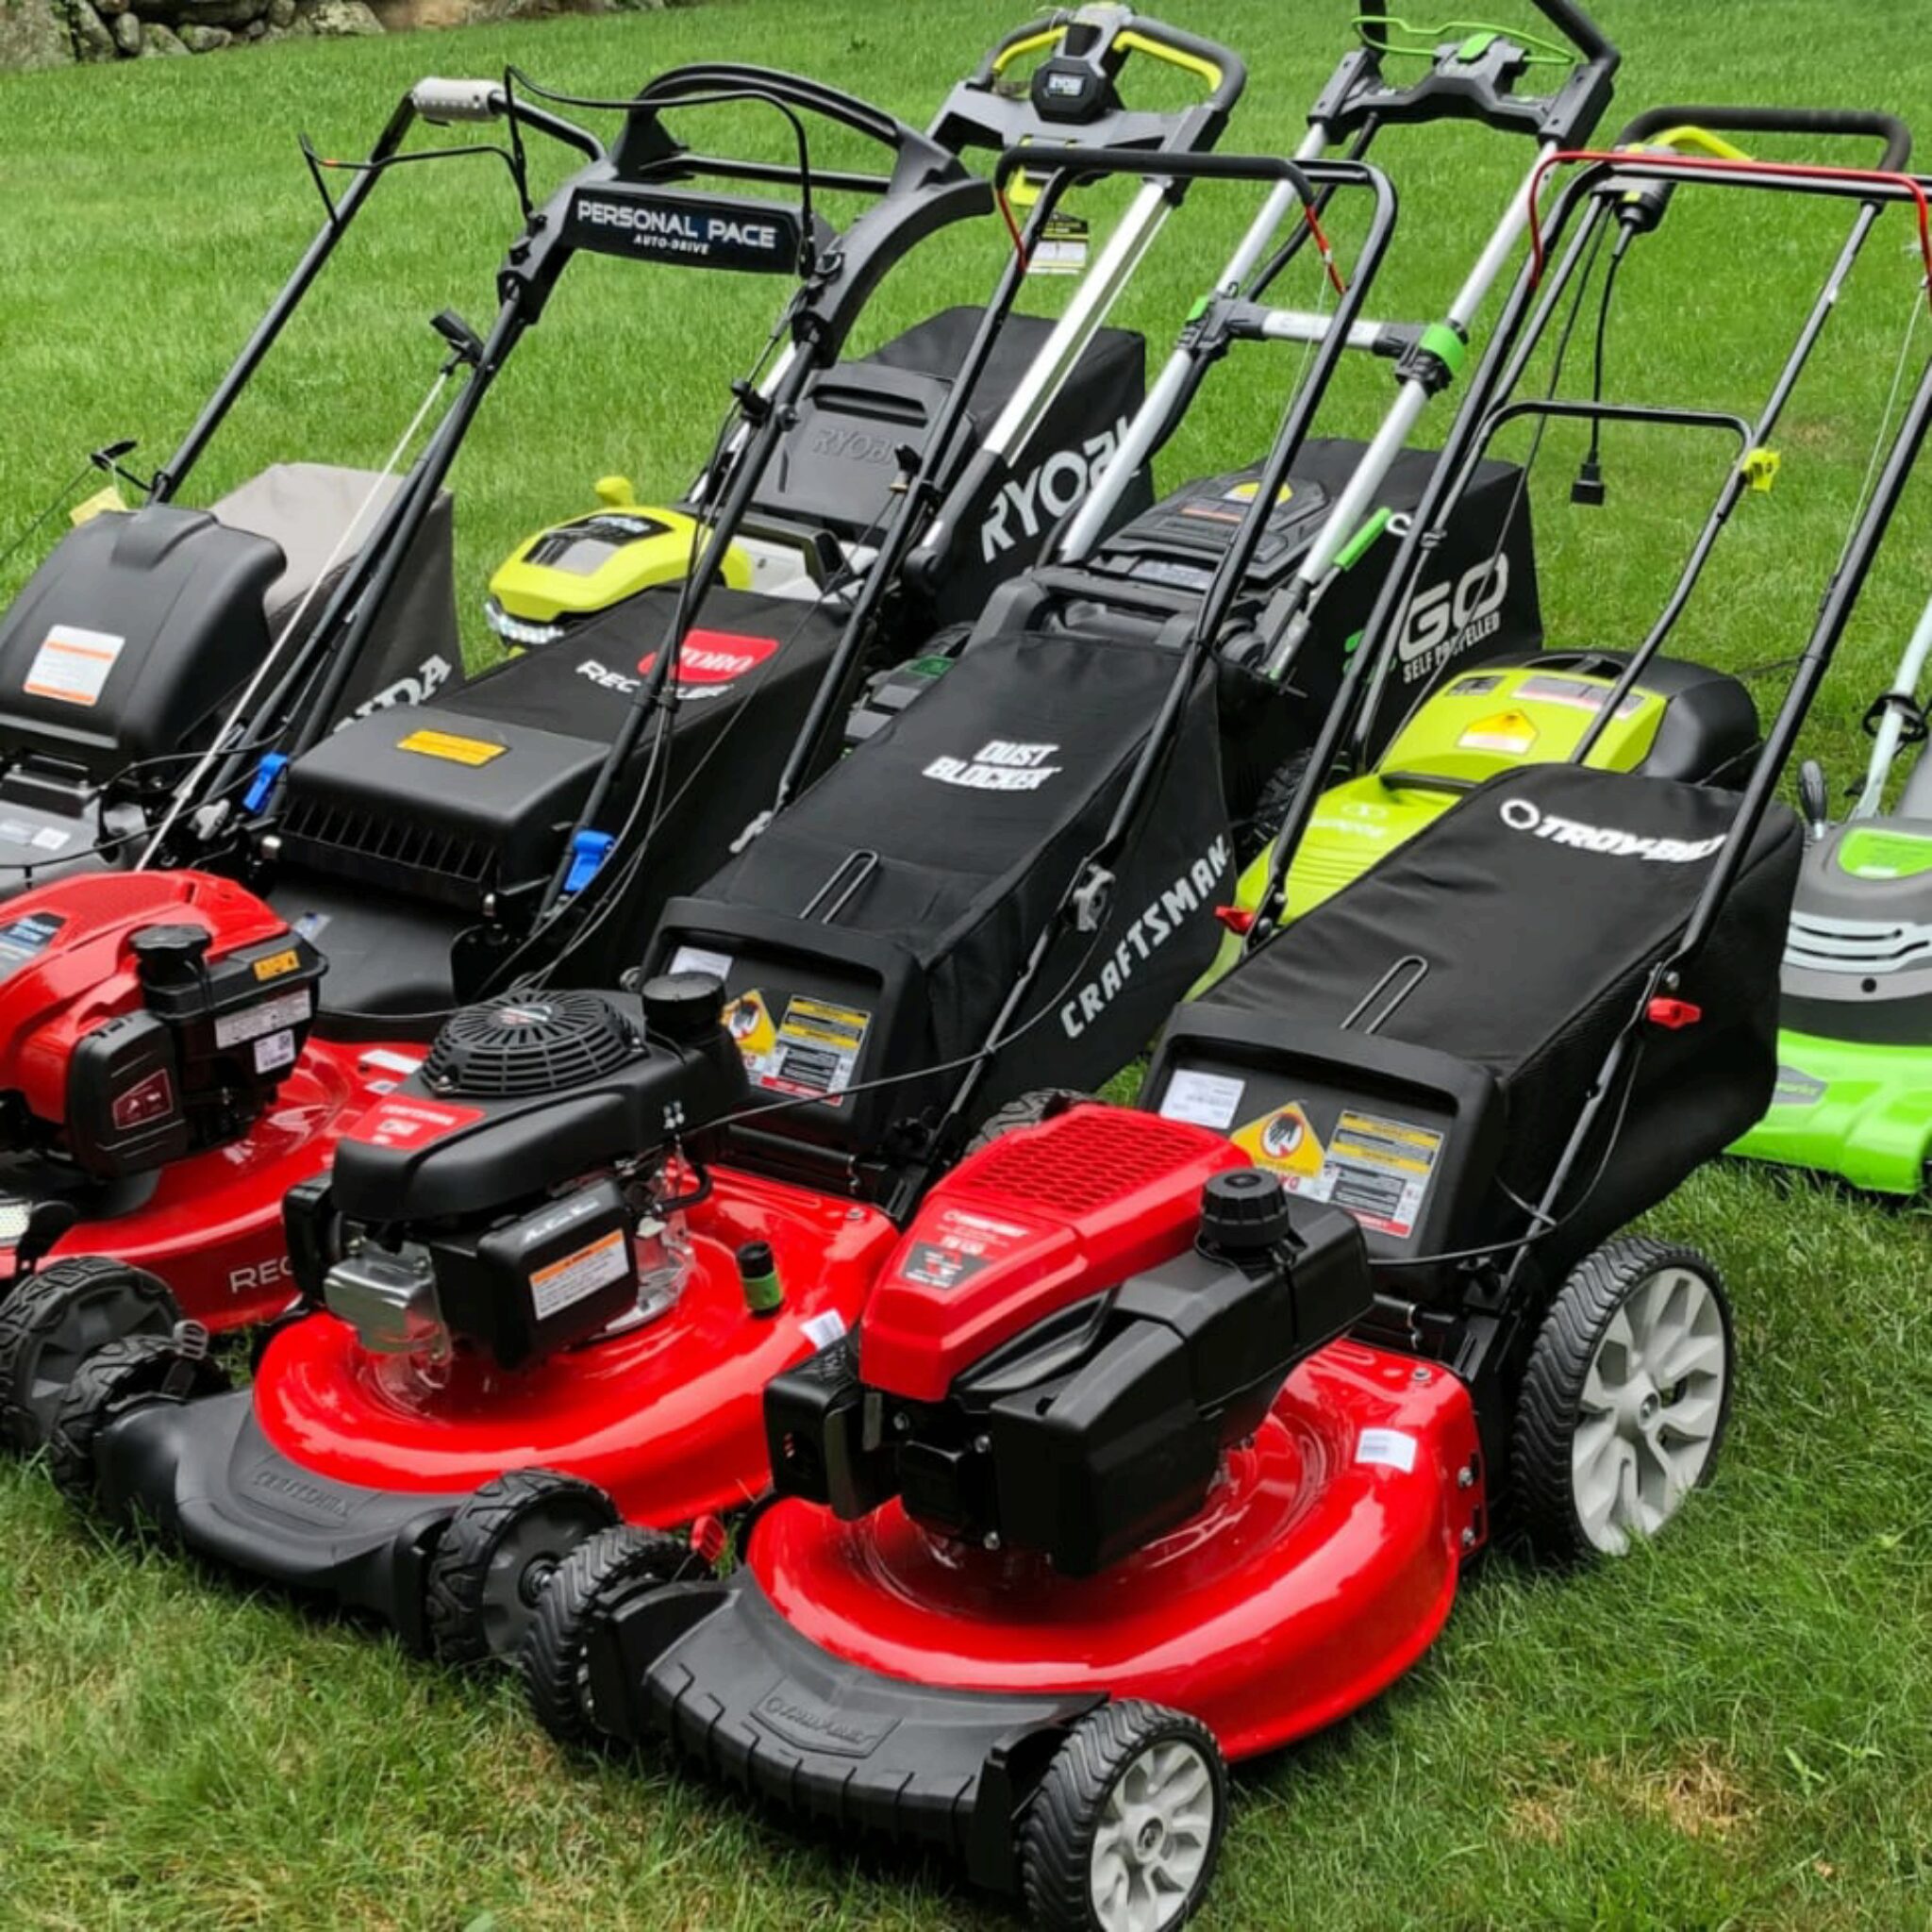 Best Lawn Mower 2022. Complete Buying Guide And Reviews